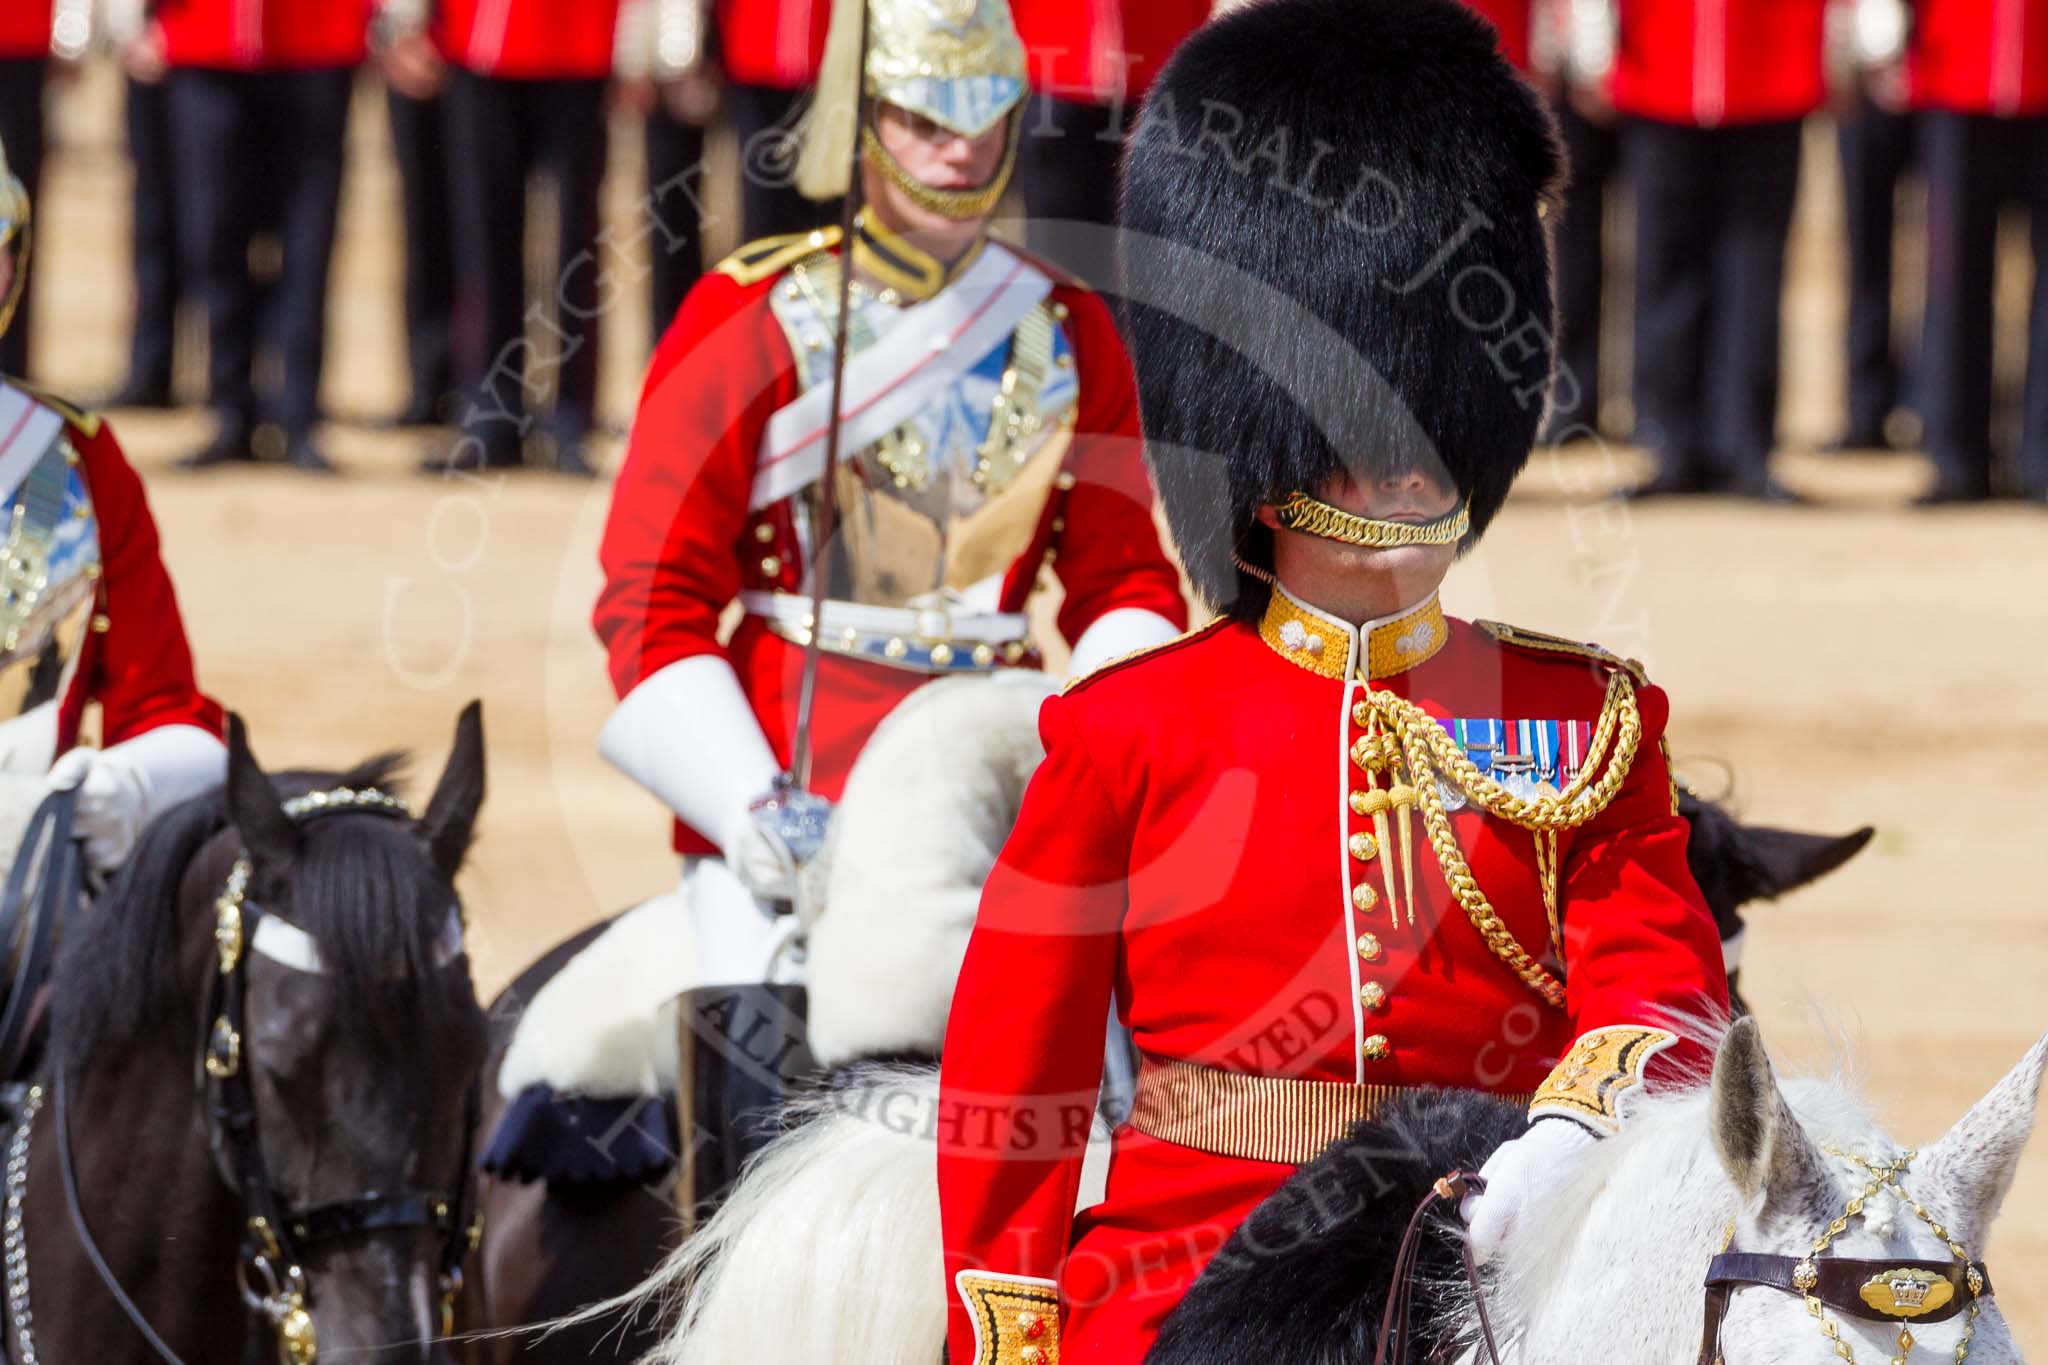 The Colonel's Review 2015.
Horse Guards Parade, Westminster,
London,

United Kingdom,
on 06 June 2015 at 11:04, image #227